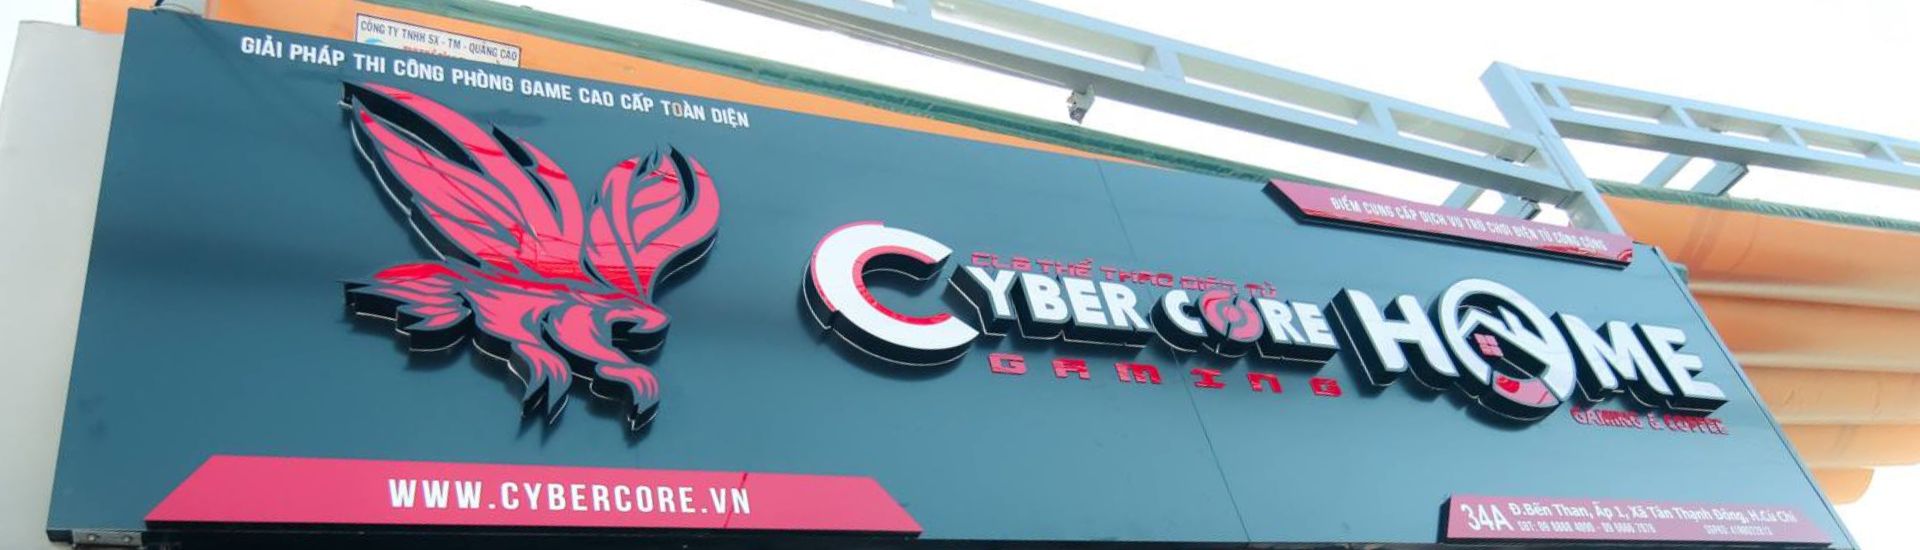 banner cybercore gaming home củ chi